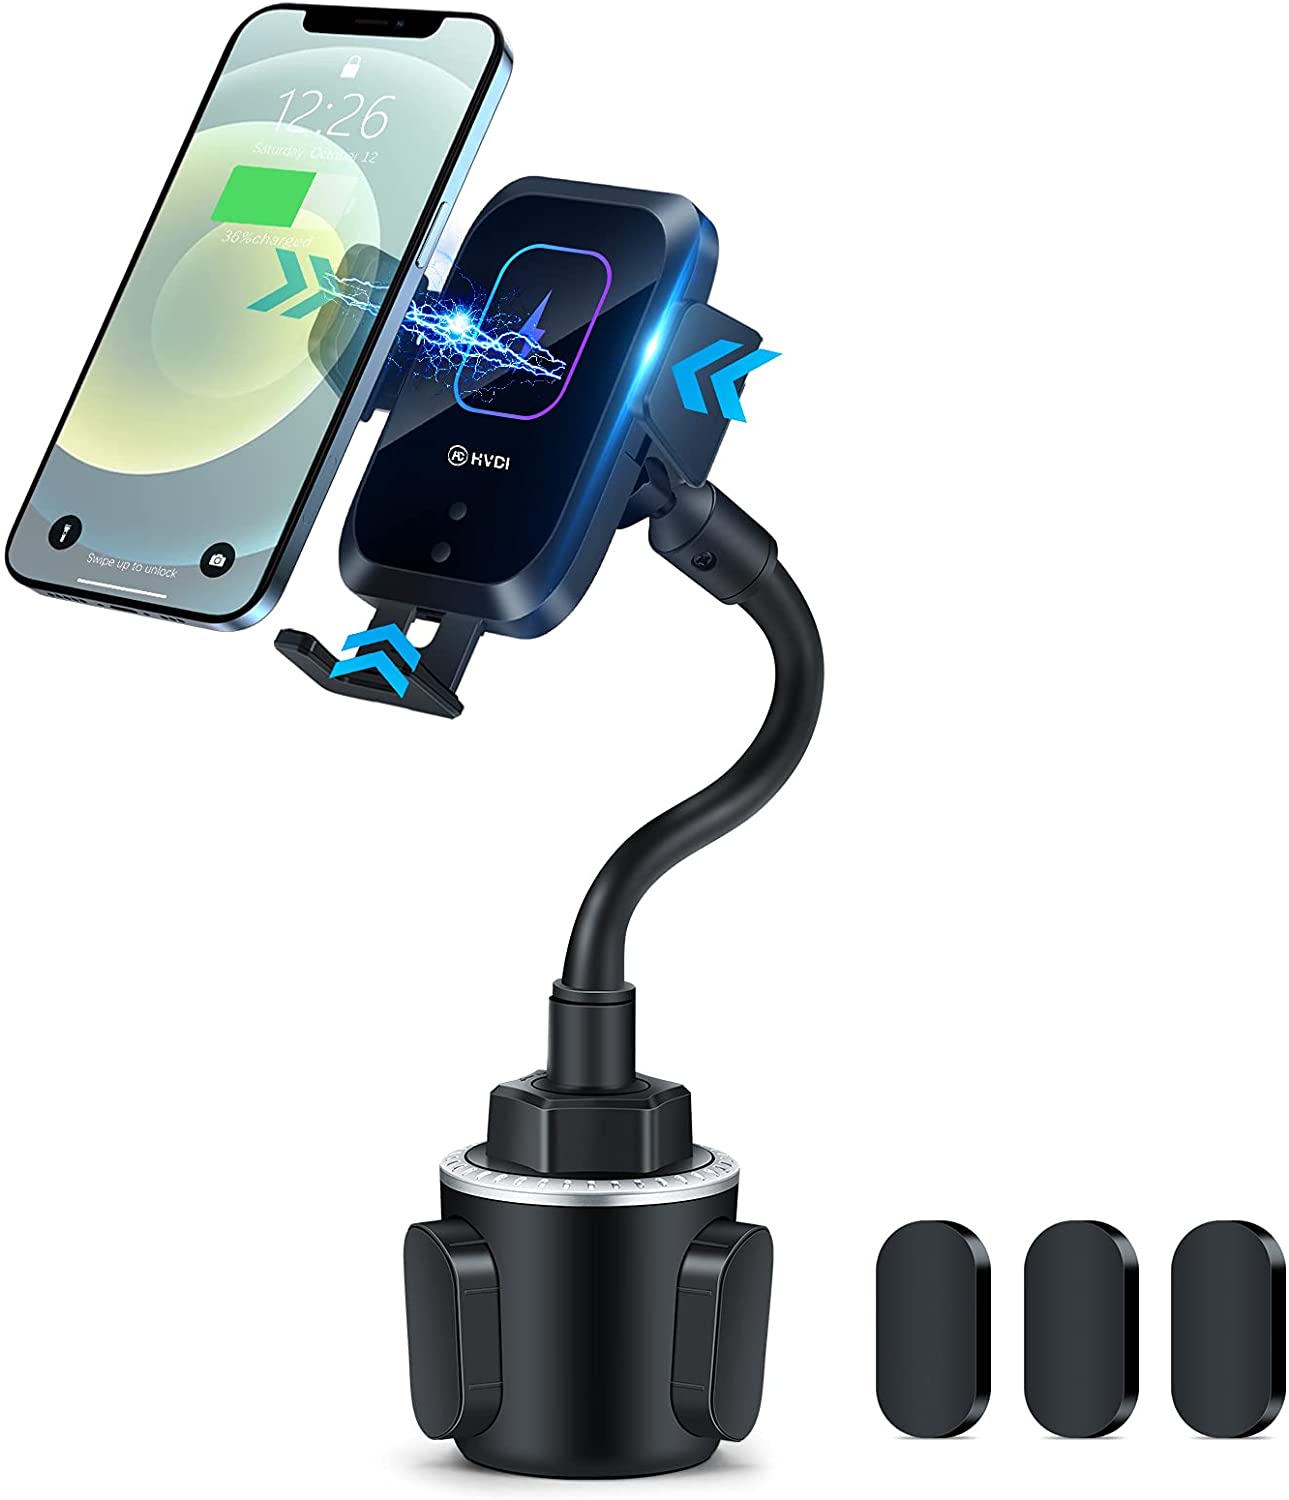 iOttie's Auto Sense cup holder Qi charging car phone mount hits new low at  $40.50 (32% off)